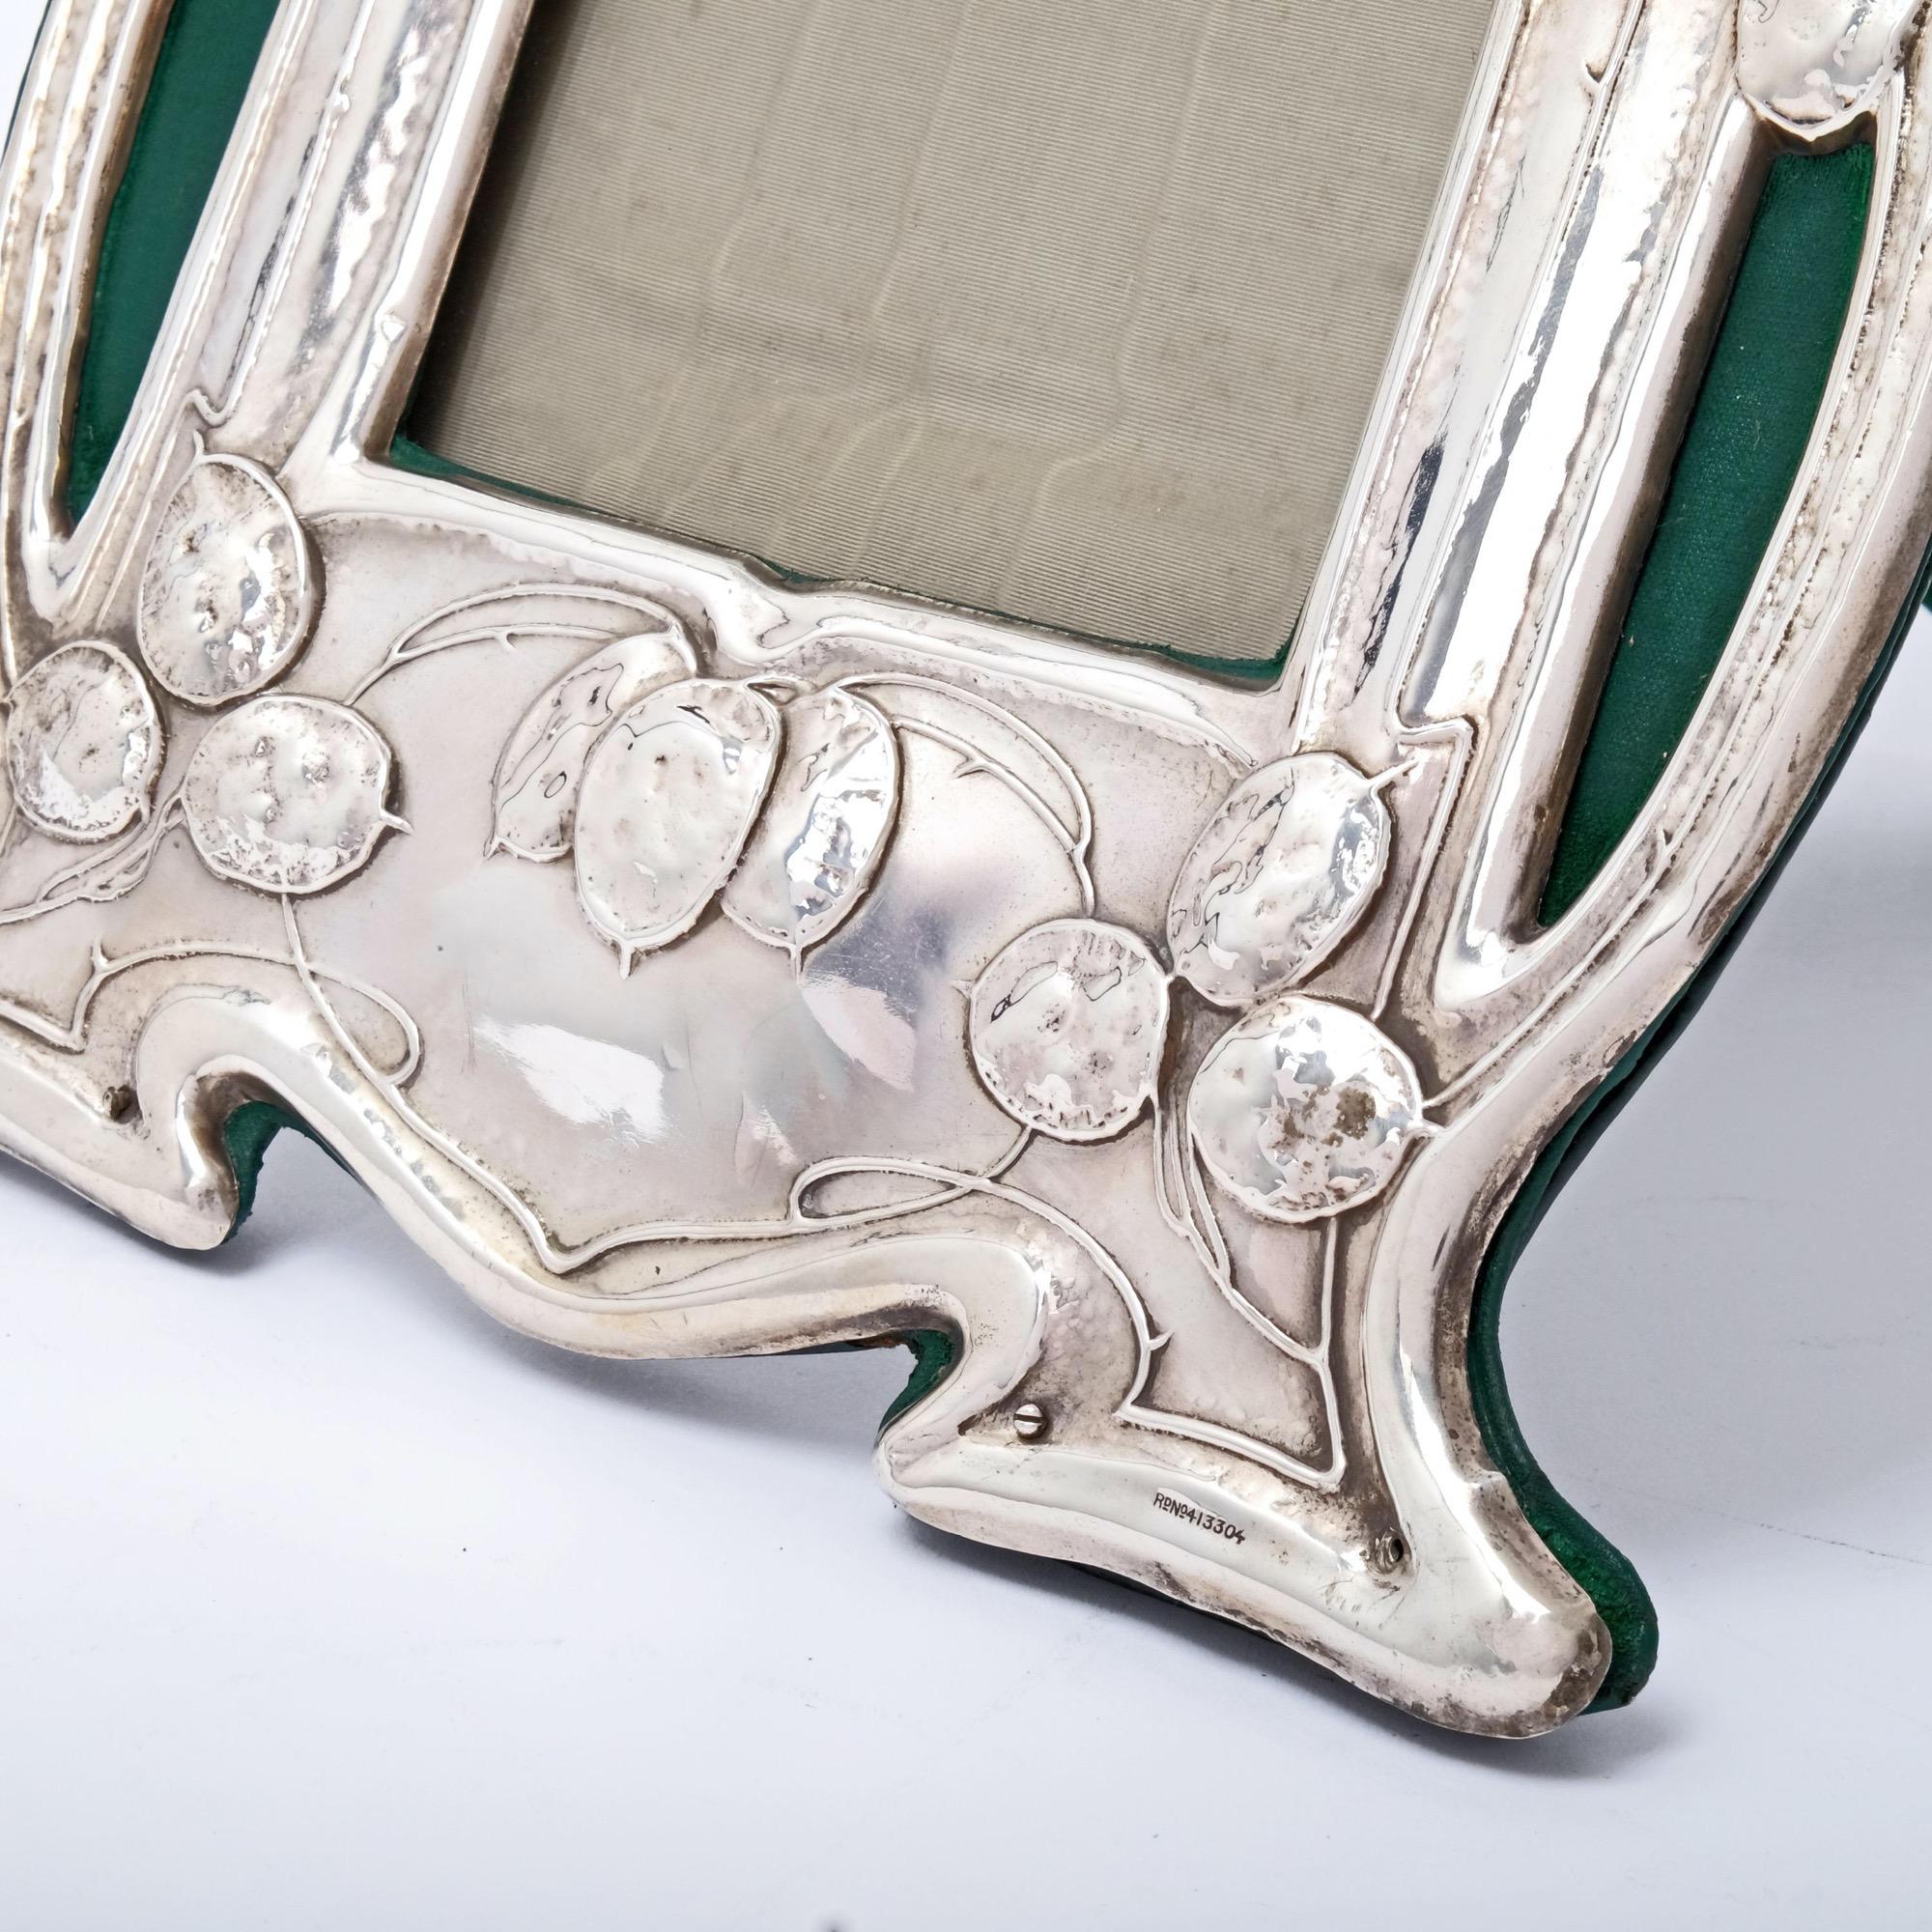 An exceptionally attractive pair of antique Edwardian Art Nouveau photo frames. The shaped and openwork frames are embossed with naturalistic leaves and tendrils that are so reminiscent of the Art Nouveau style. Fitted with green leather backs and